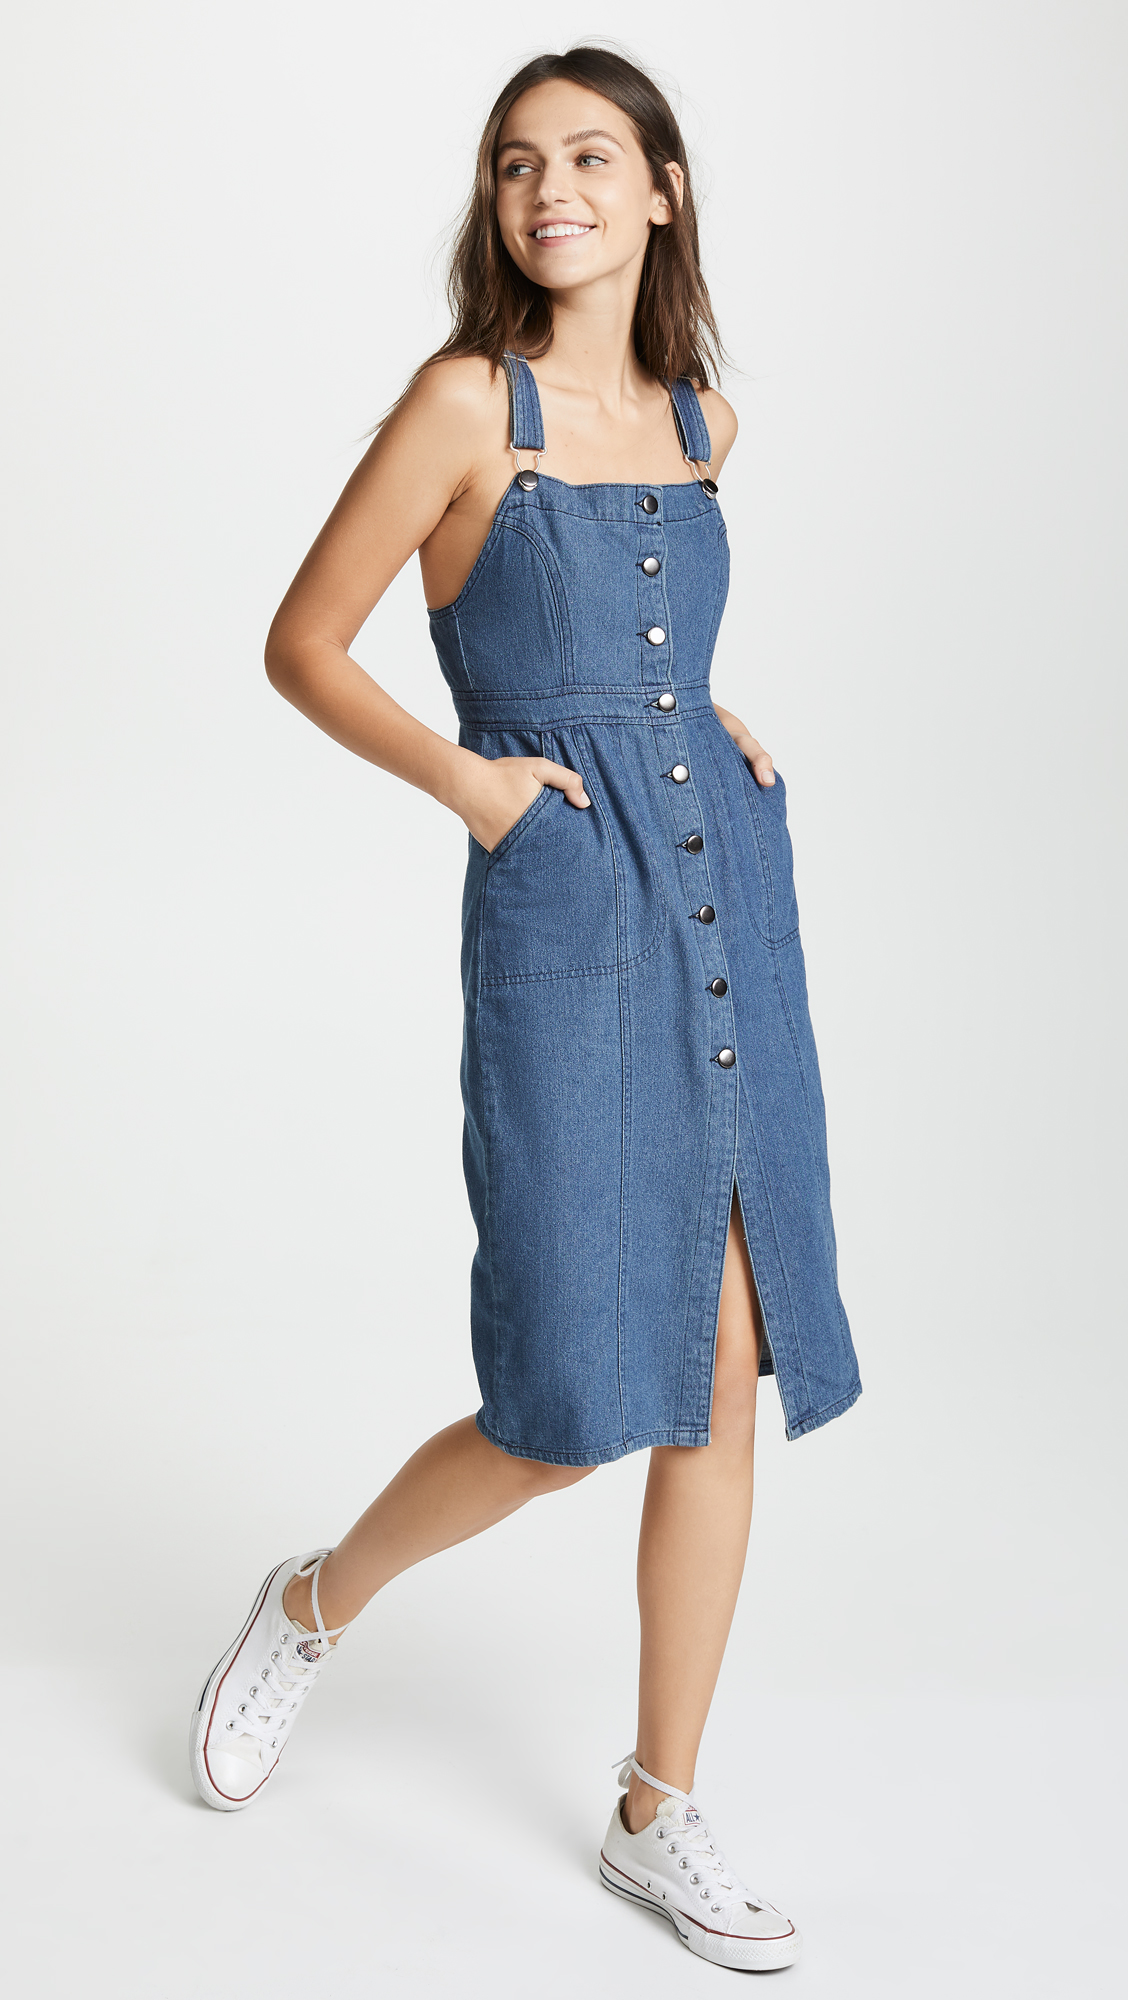 cute overall dress outfits